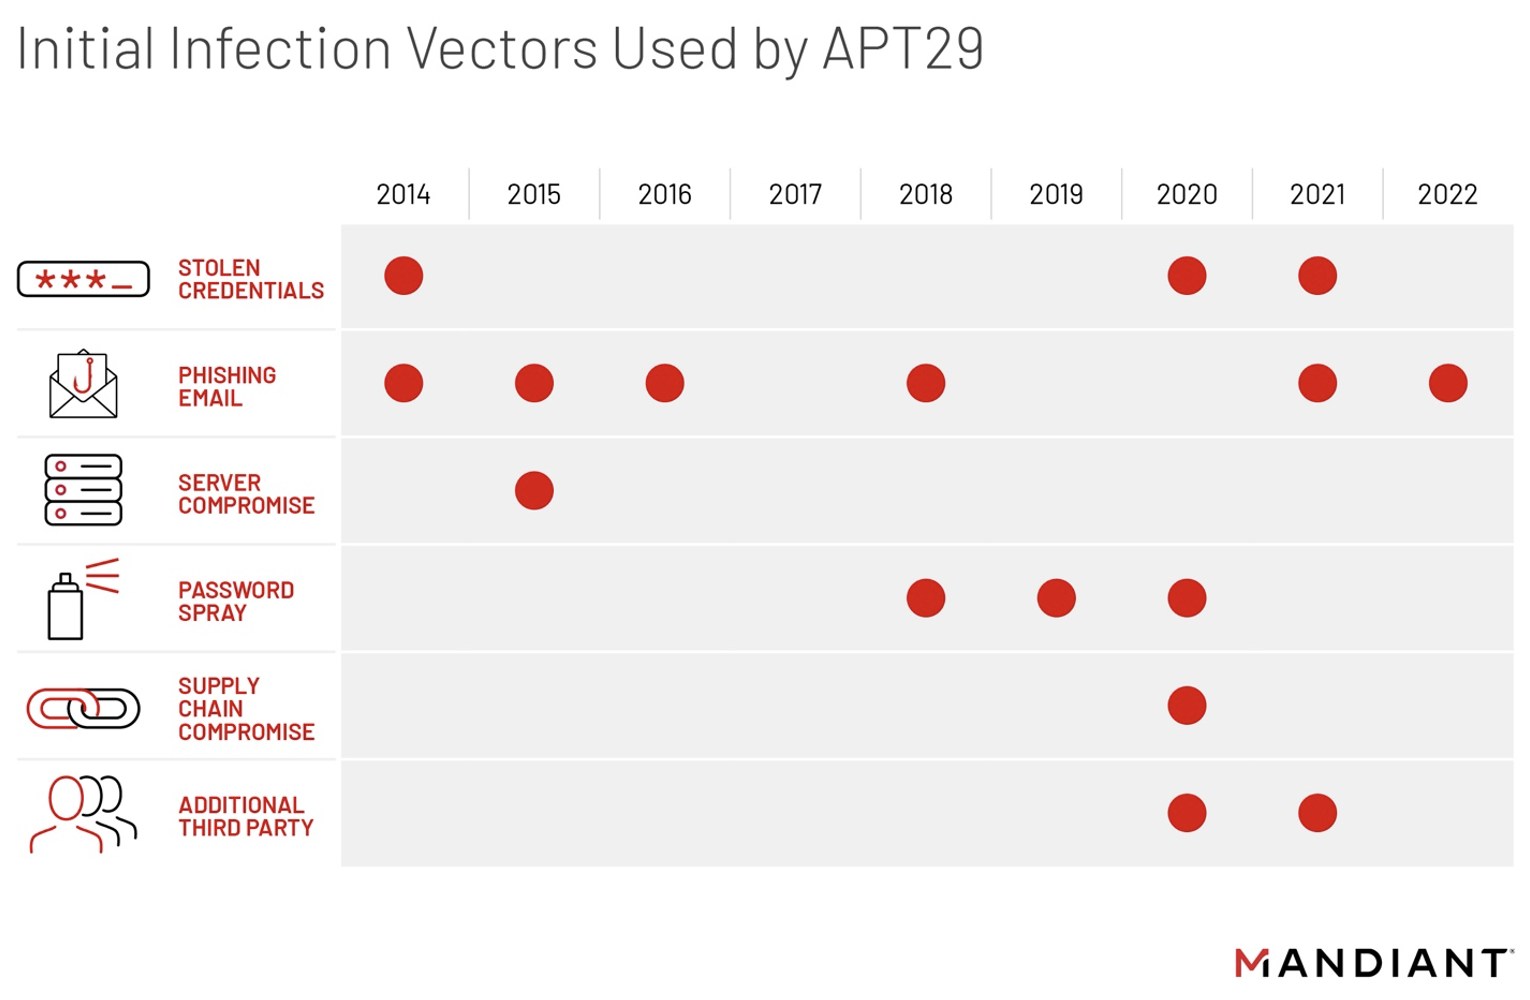 Initial Infection Vectors used by APT29 